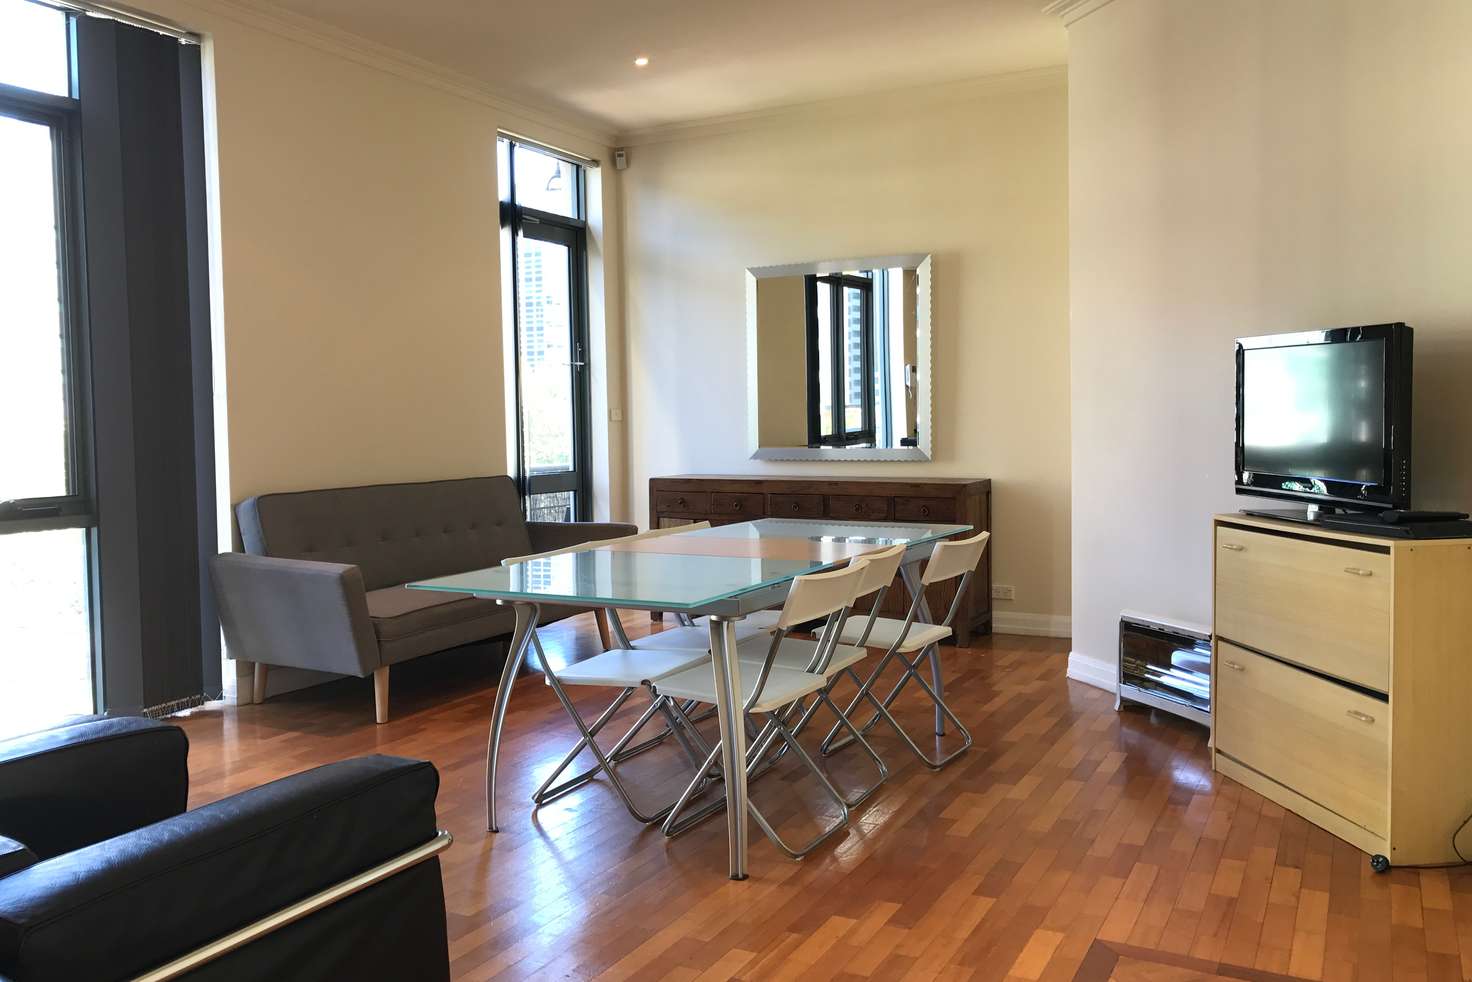 Main view of Homely apartment listing, 415/406 La Trobe Street, Melbourne VIC 3000